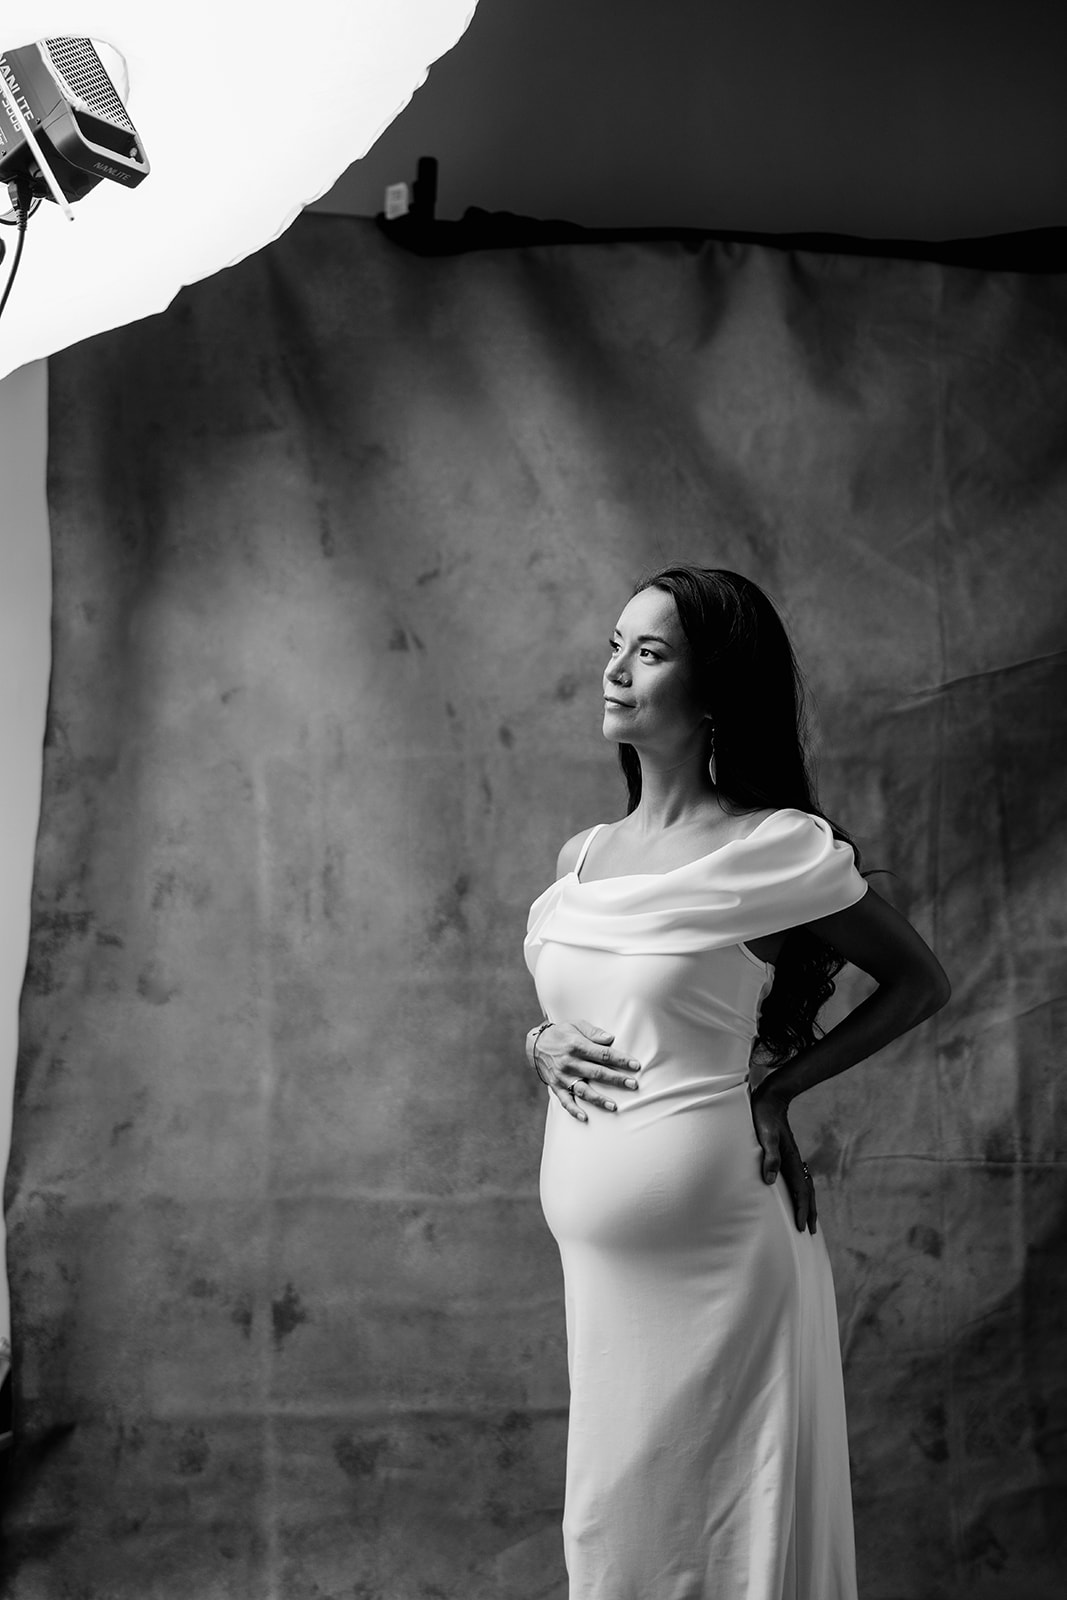 A monochrome photo of a pregnant woman in a white dress touching her bump.